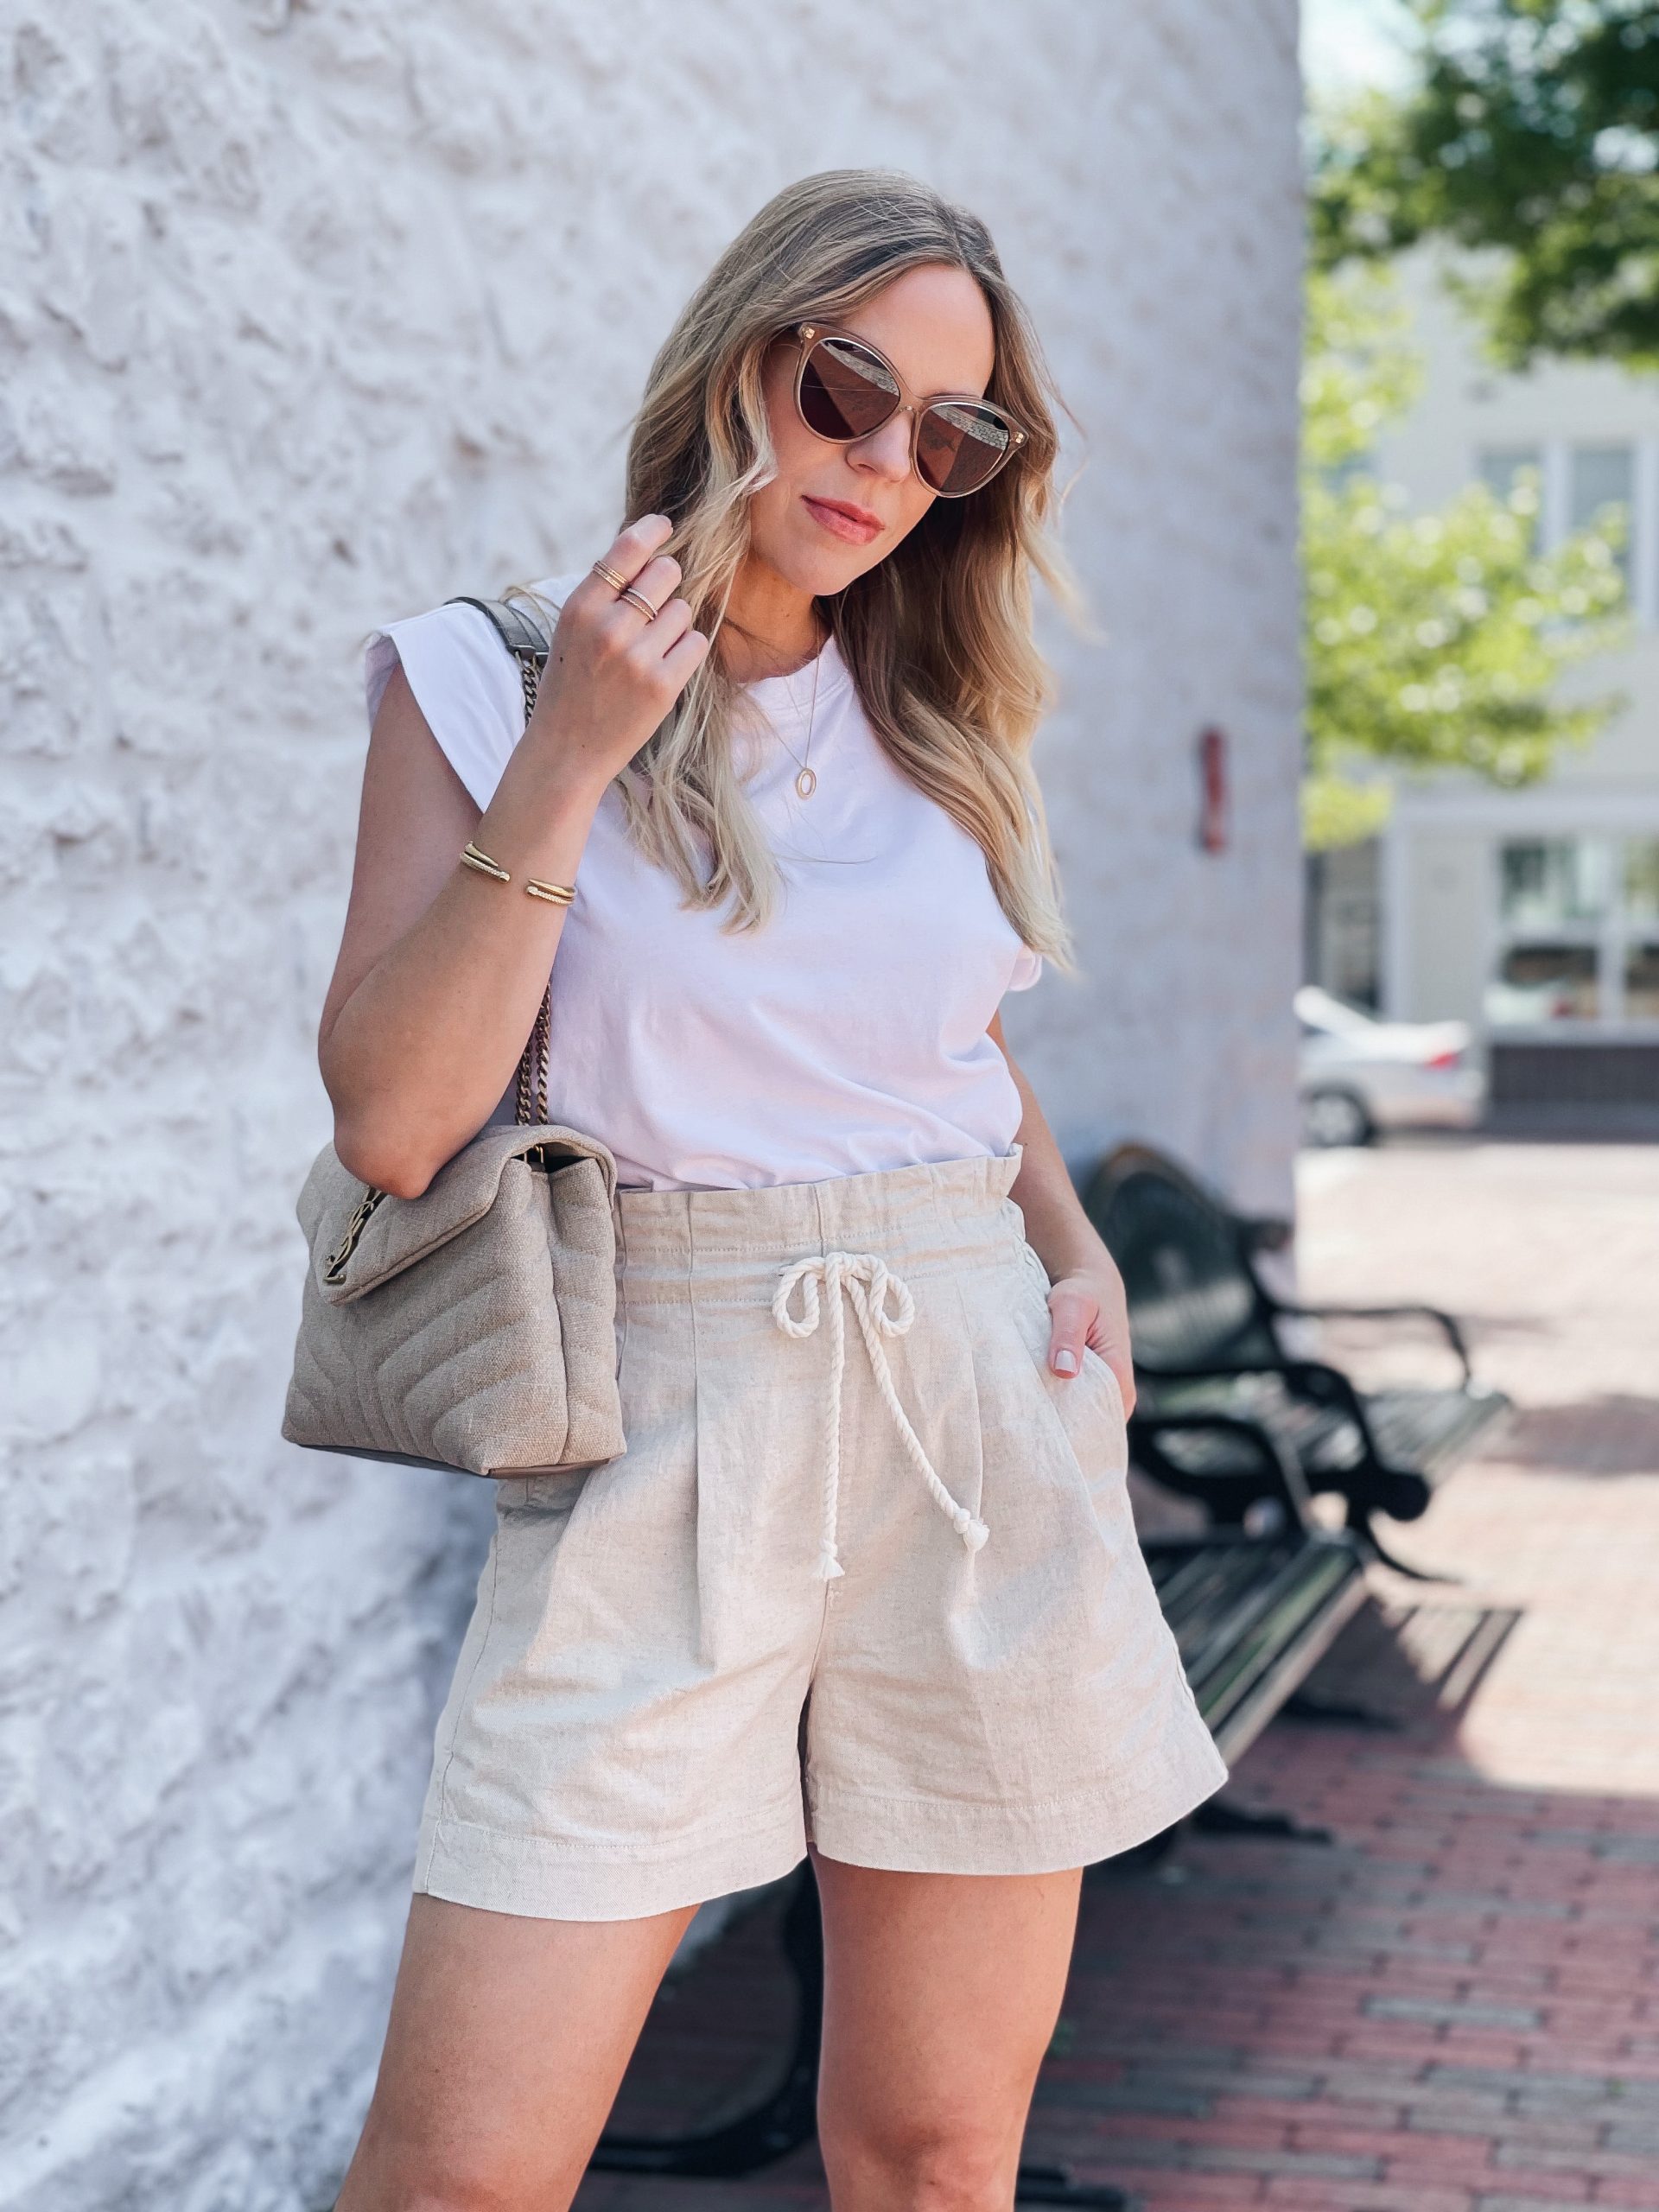 Relaxed summer style  Postpartum fashion, Post partum outfits, Post baby  outfit